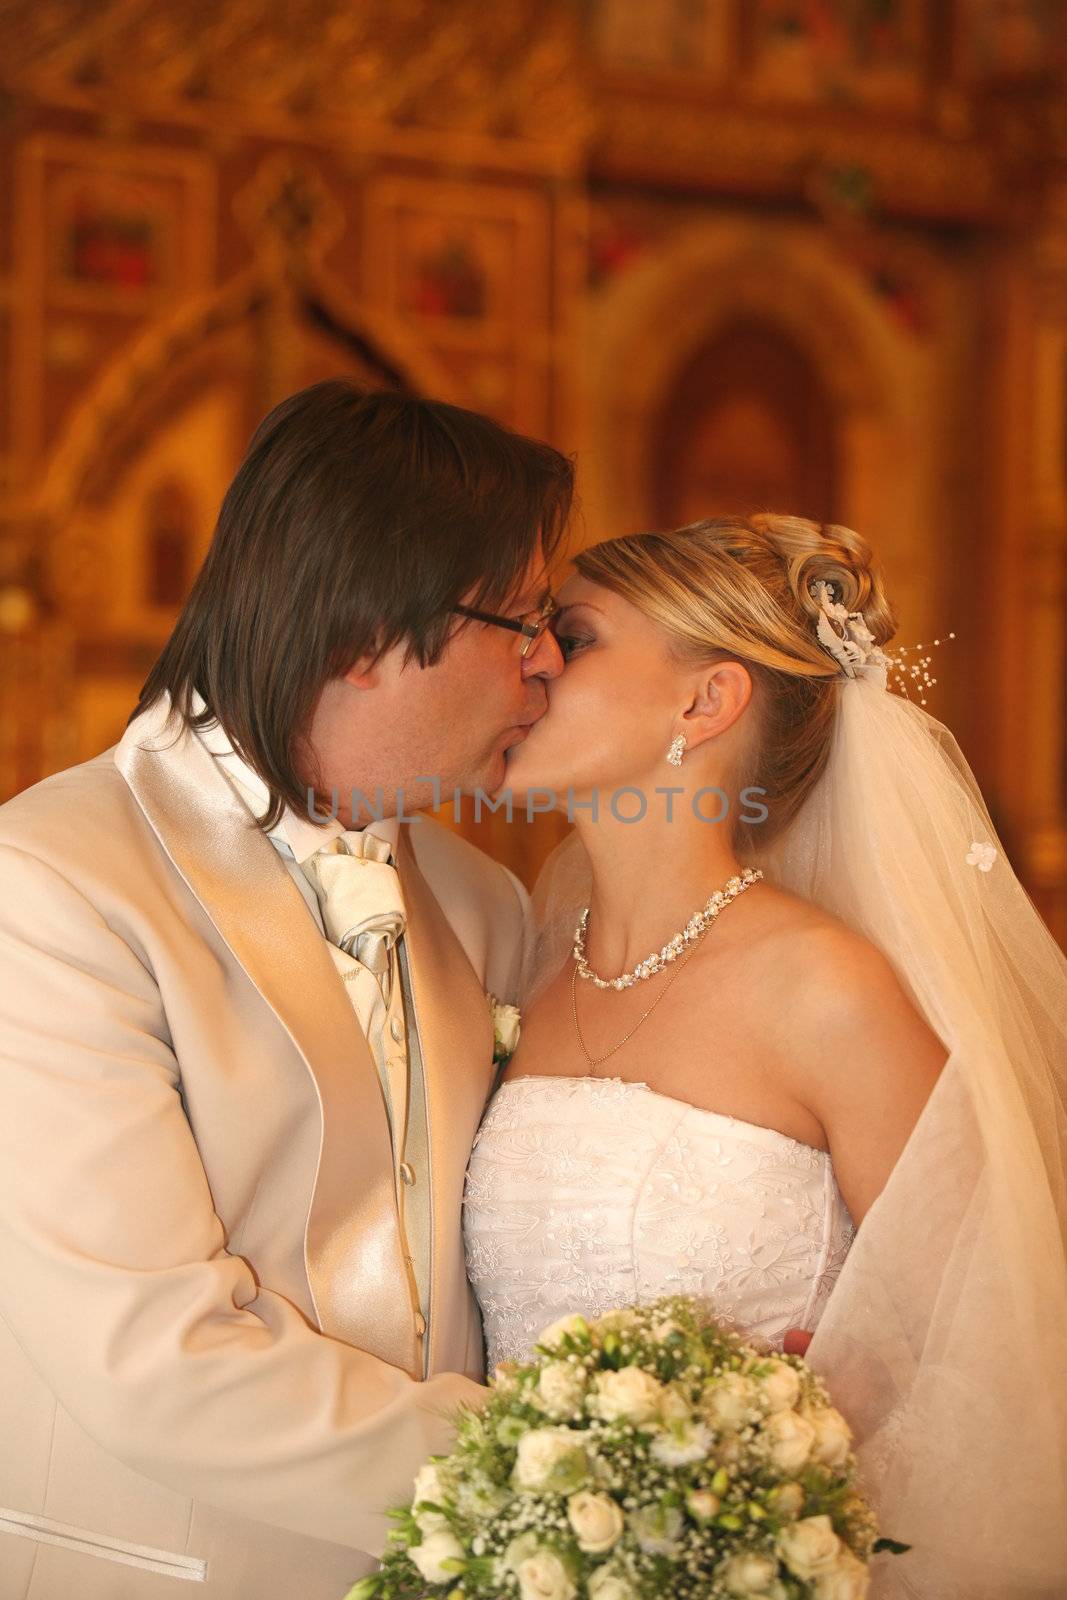 The groom and the bride kiss in church